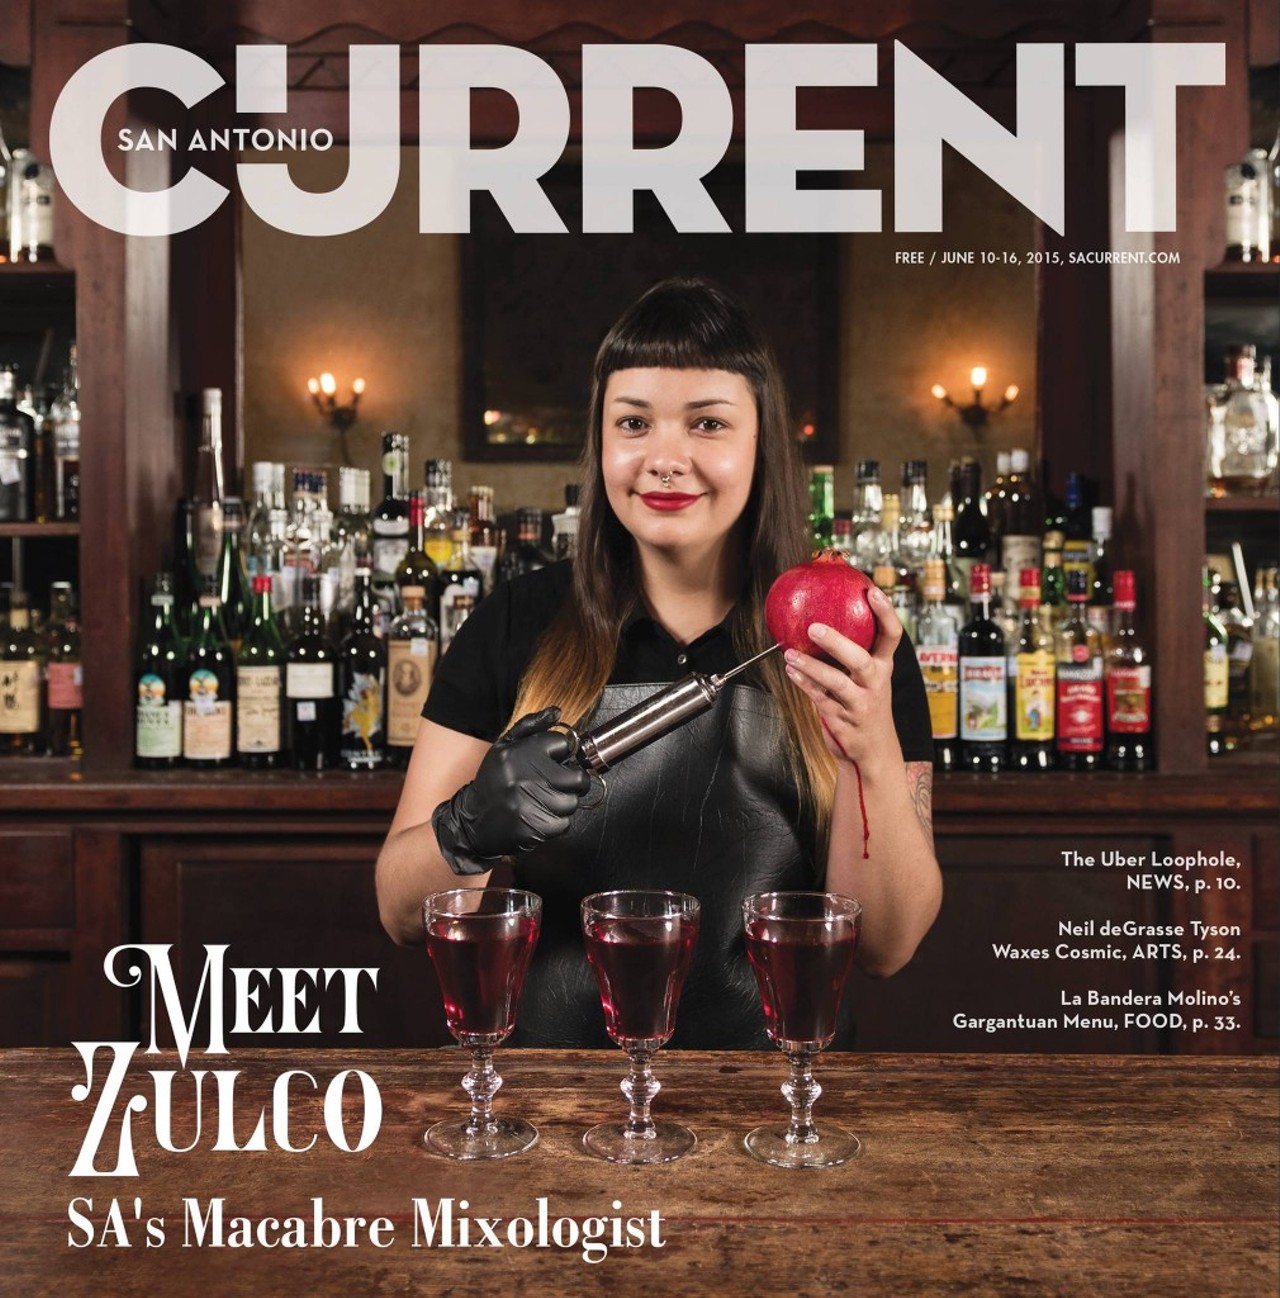 June 10-16, Could SA's Zulco Rodriguez Become The Country's Top Female Bartender? 